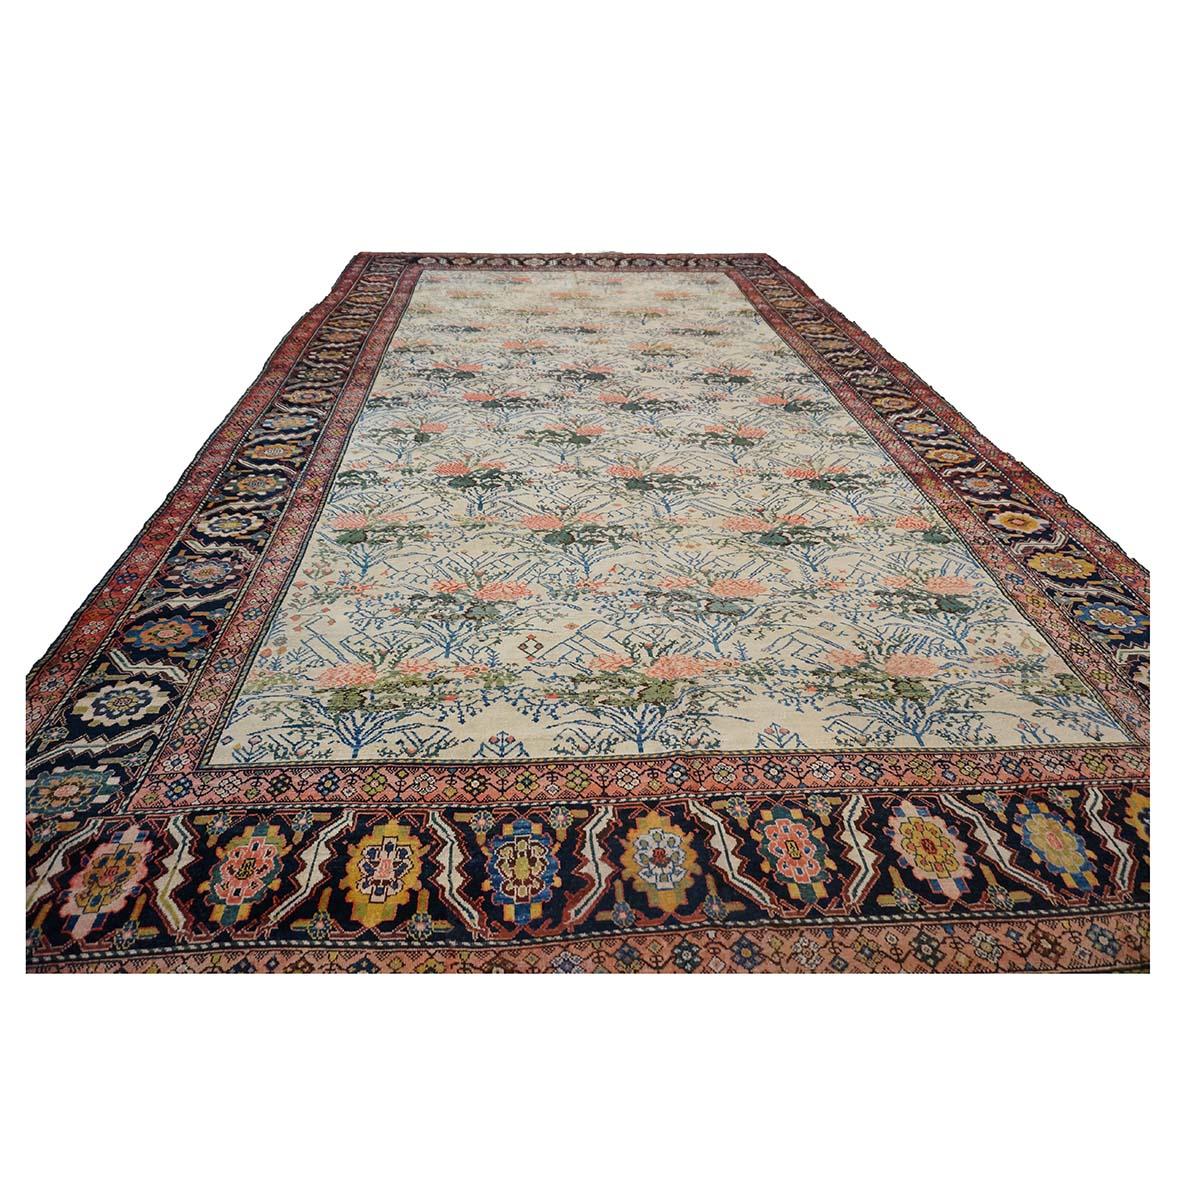 Ashly Fine Rugs Presents an unusual Antique Persian Malayer with a typical border found in Malayer carpets but the most unusual field design that resembles rugs of Bijar with the Golfarang (European flower) This rug has a good quality weave with no